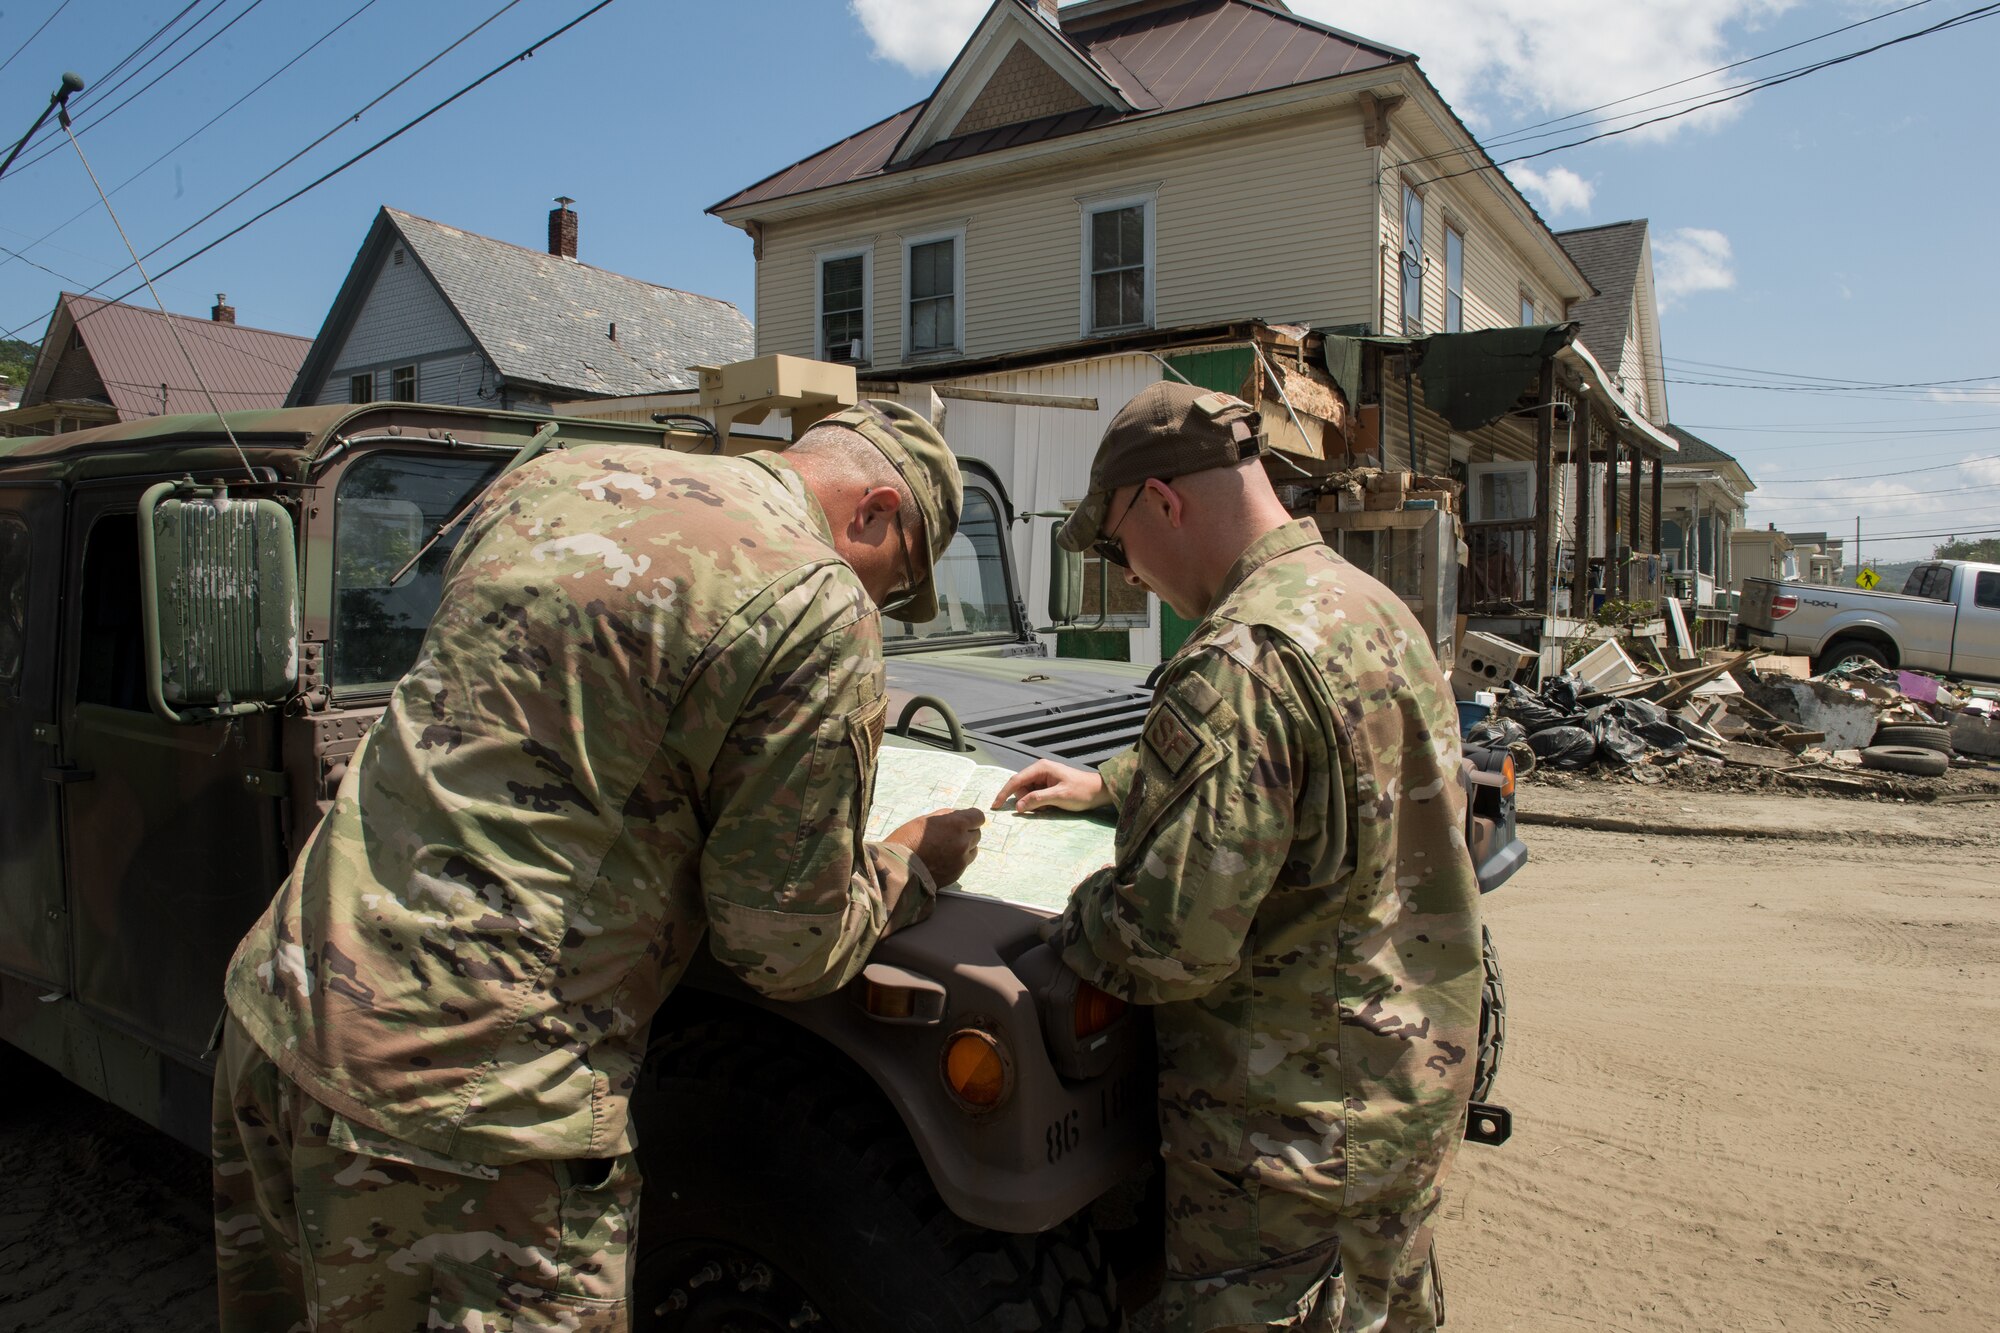 Photo of Senior Master Sgt. Matthew Powell (left), 158th Cyber Operations superintendent, and Tech. Sgt. Brandon Matott, 158th Security Forces Squadron personnel, surveying a map as part of a Liaison Officer Mission, amidst rubble and debris caused by historic flooding in Barre, Vermont, July 19, 2023. The purpose of the Liaison Officer mission is to meet with town leaders and report information from the town back to the state for possible resourcing. (U.S. Air Force photo by Tech. Sgt. Richard Mekkri)